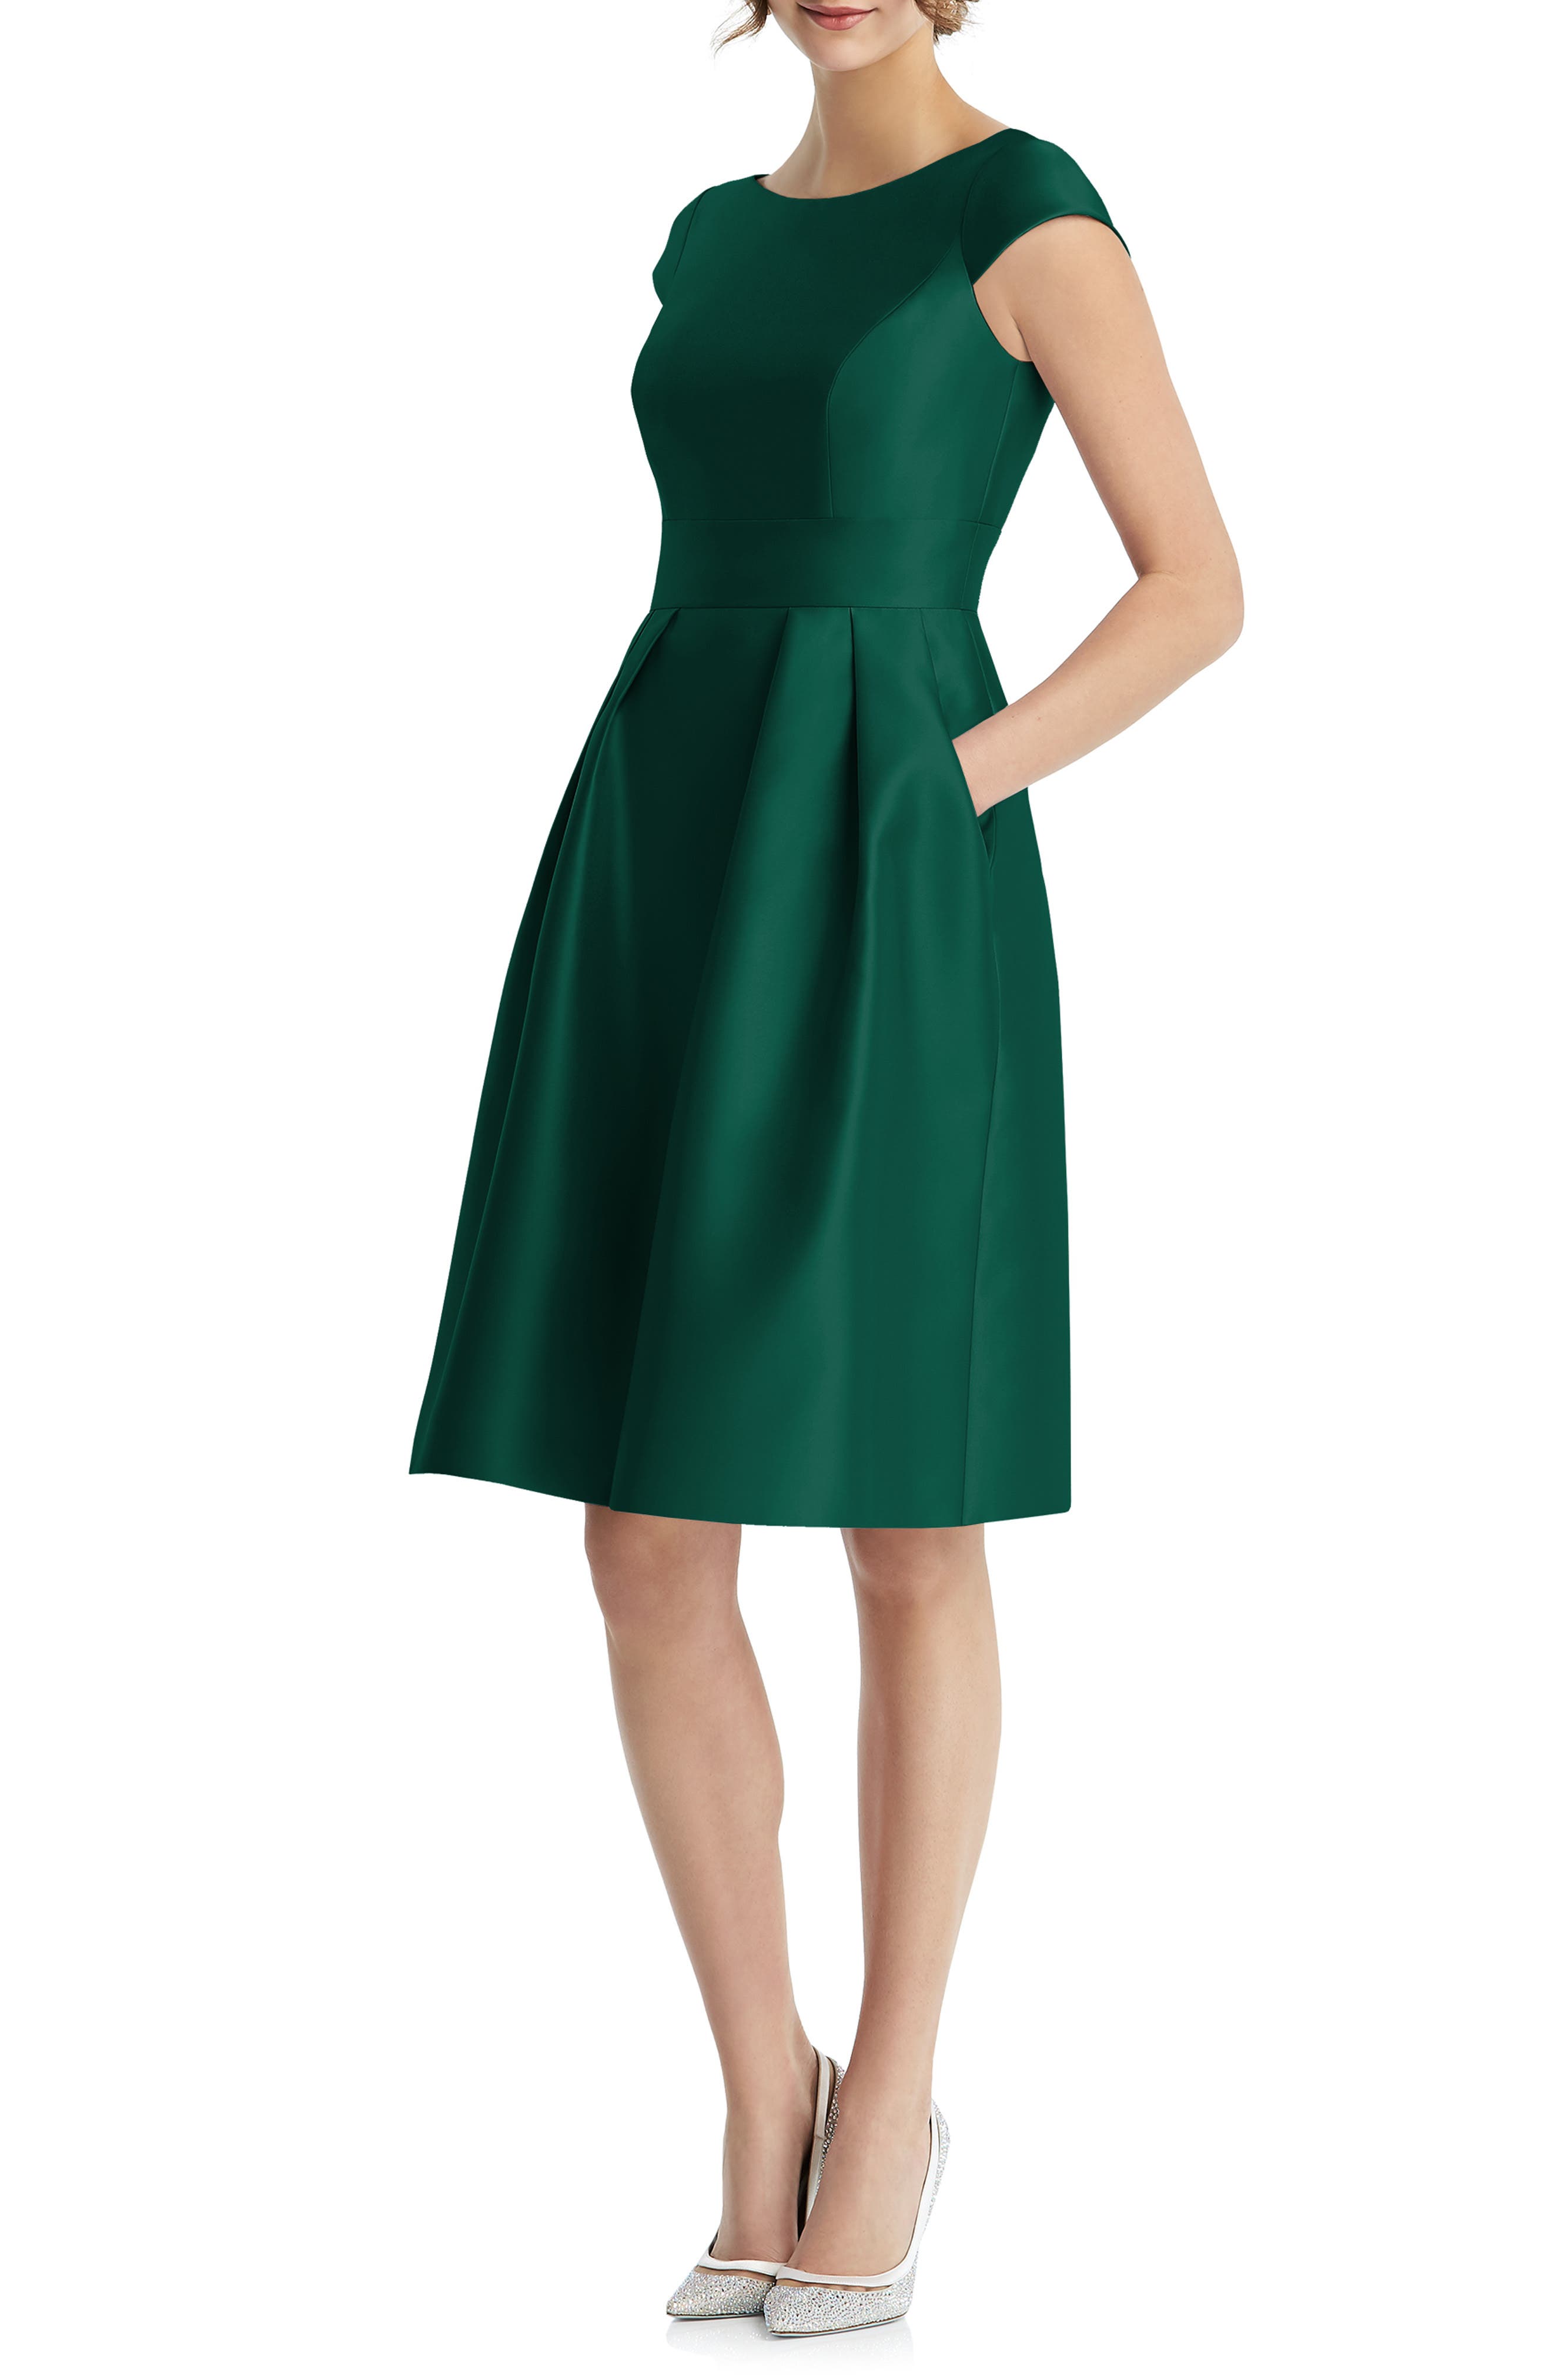 Green Cocktail Dresses ☀ Party Dresses ...